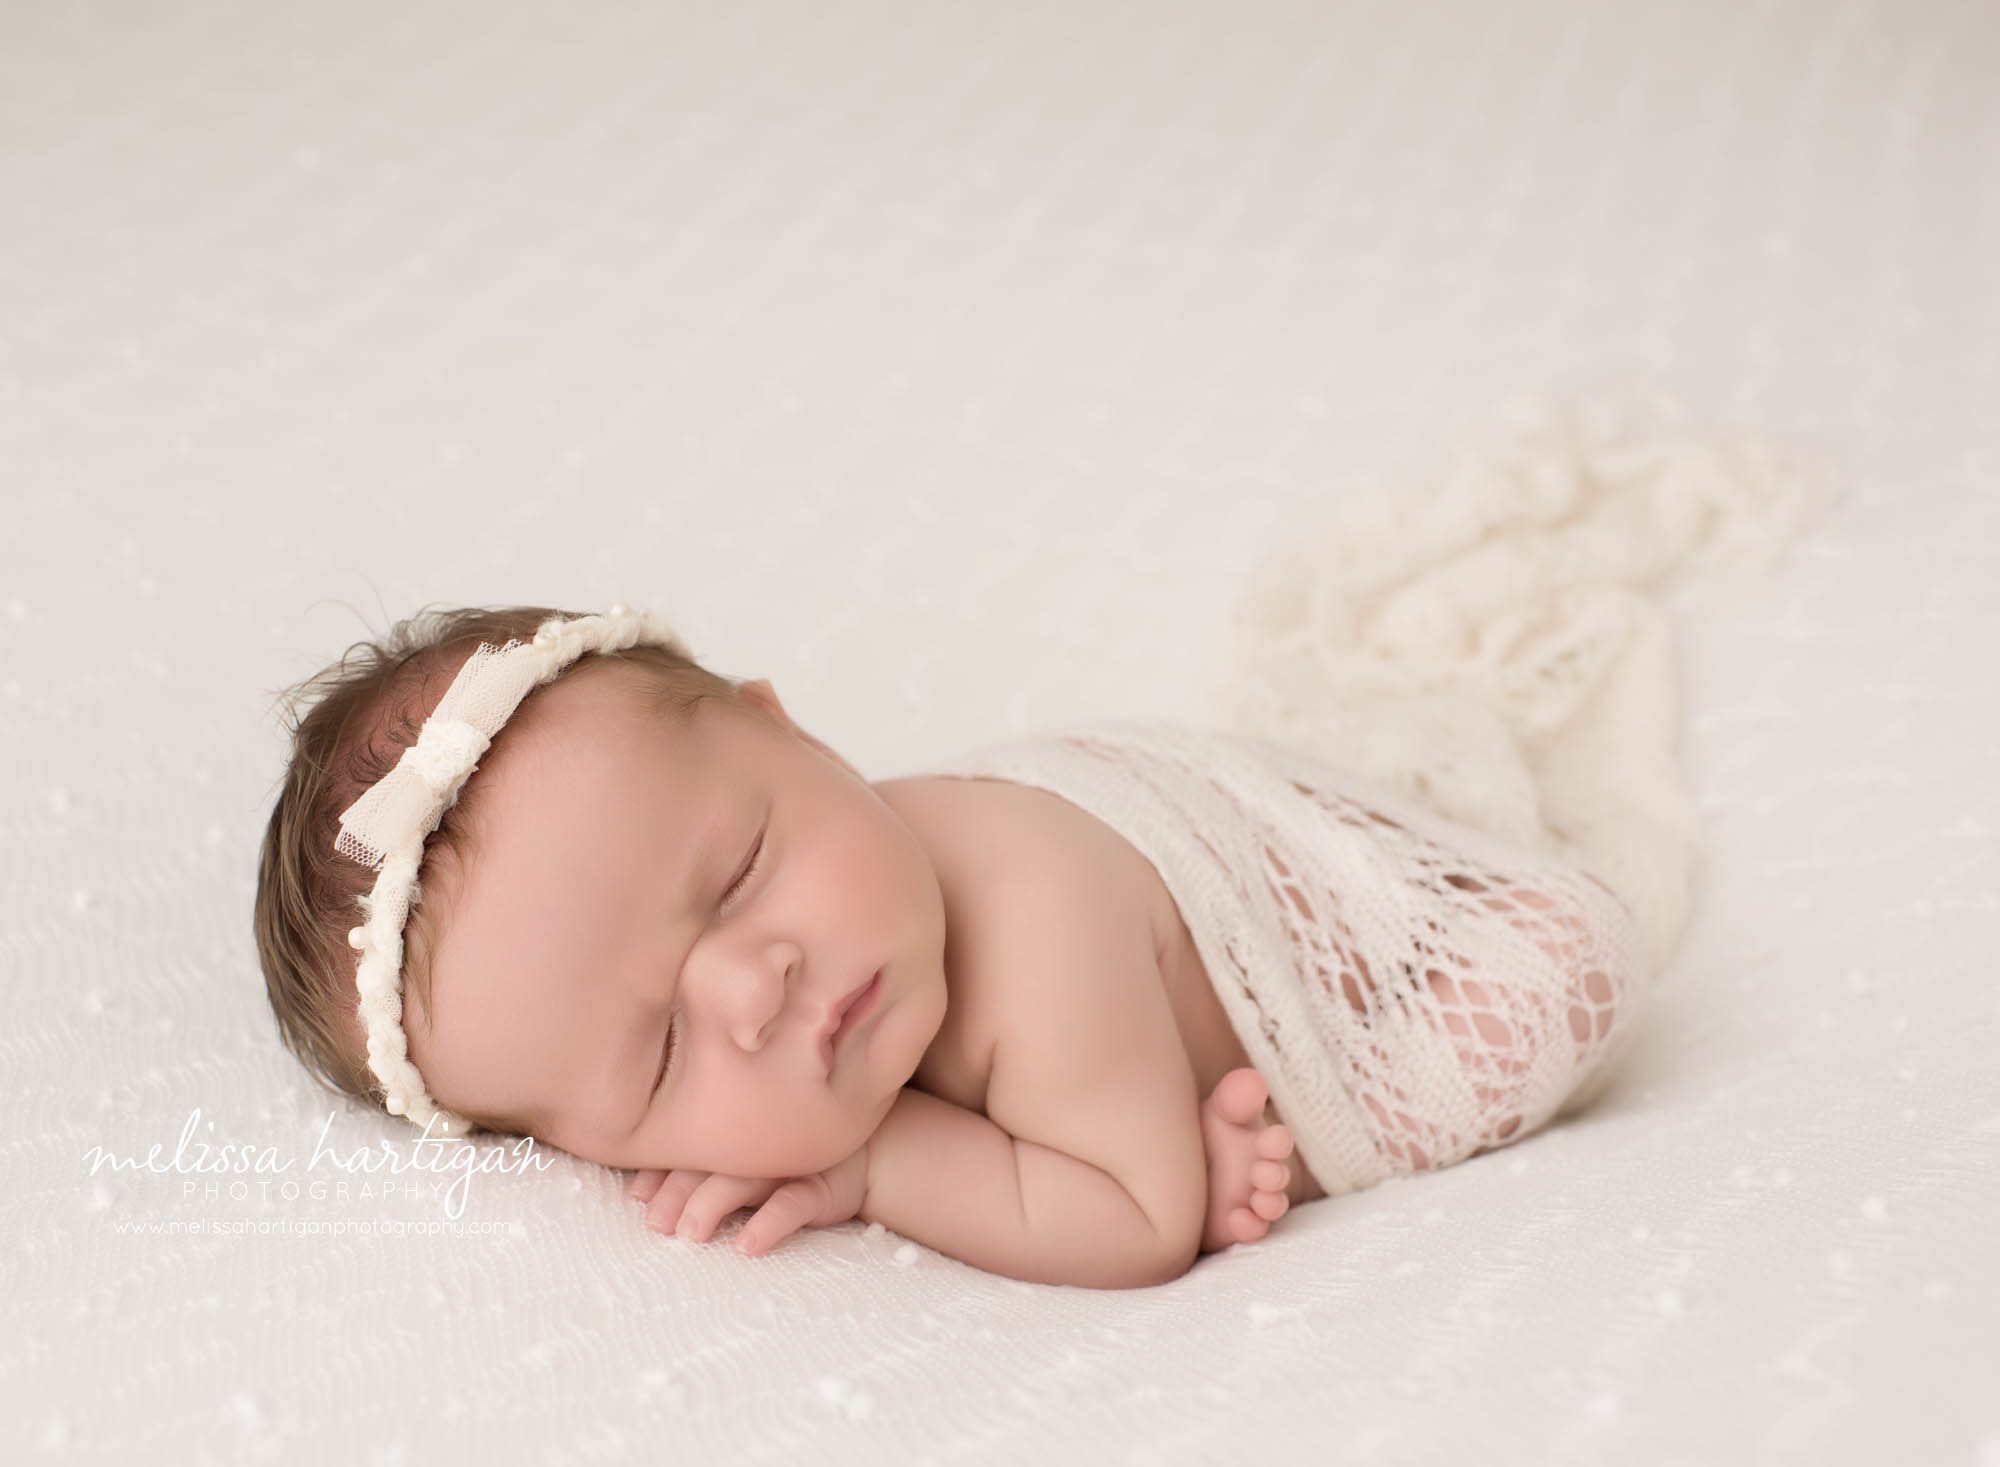 newborn baby girl posed on tummy wearing headband and knit wrap draped over her back